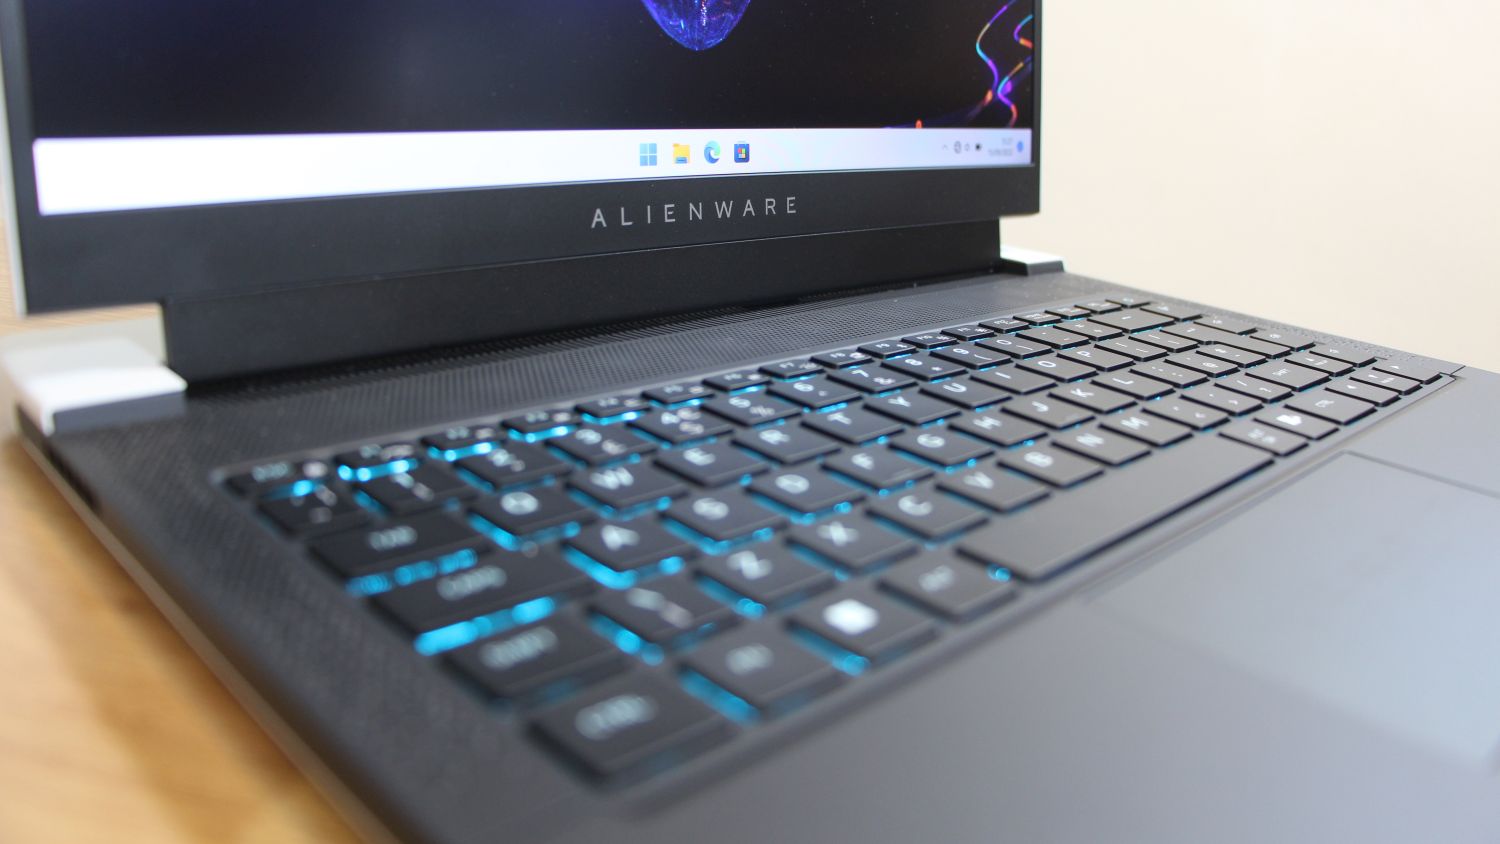 Alienware x14 laptop open, close up view of brand name